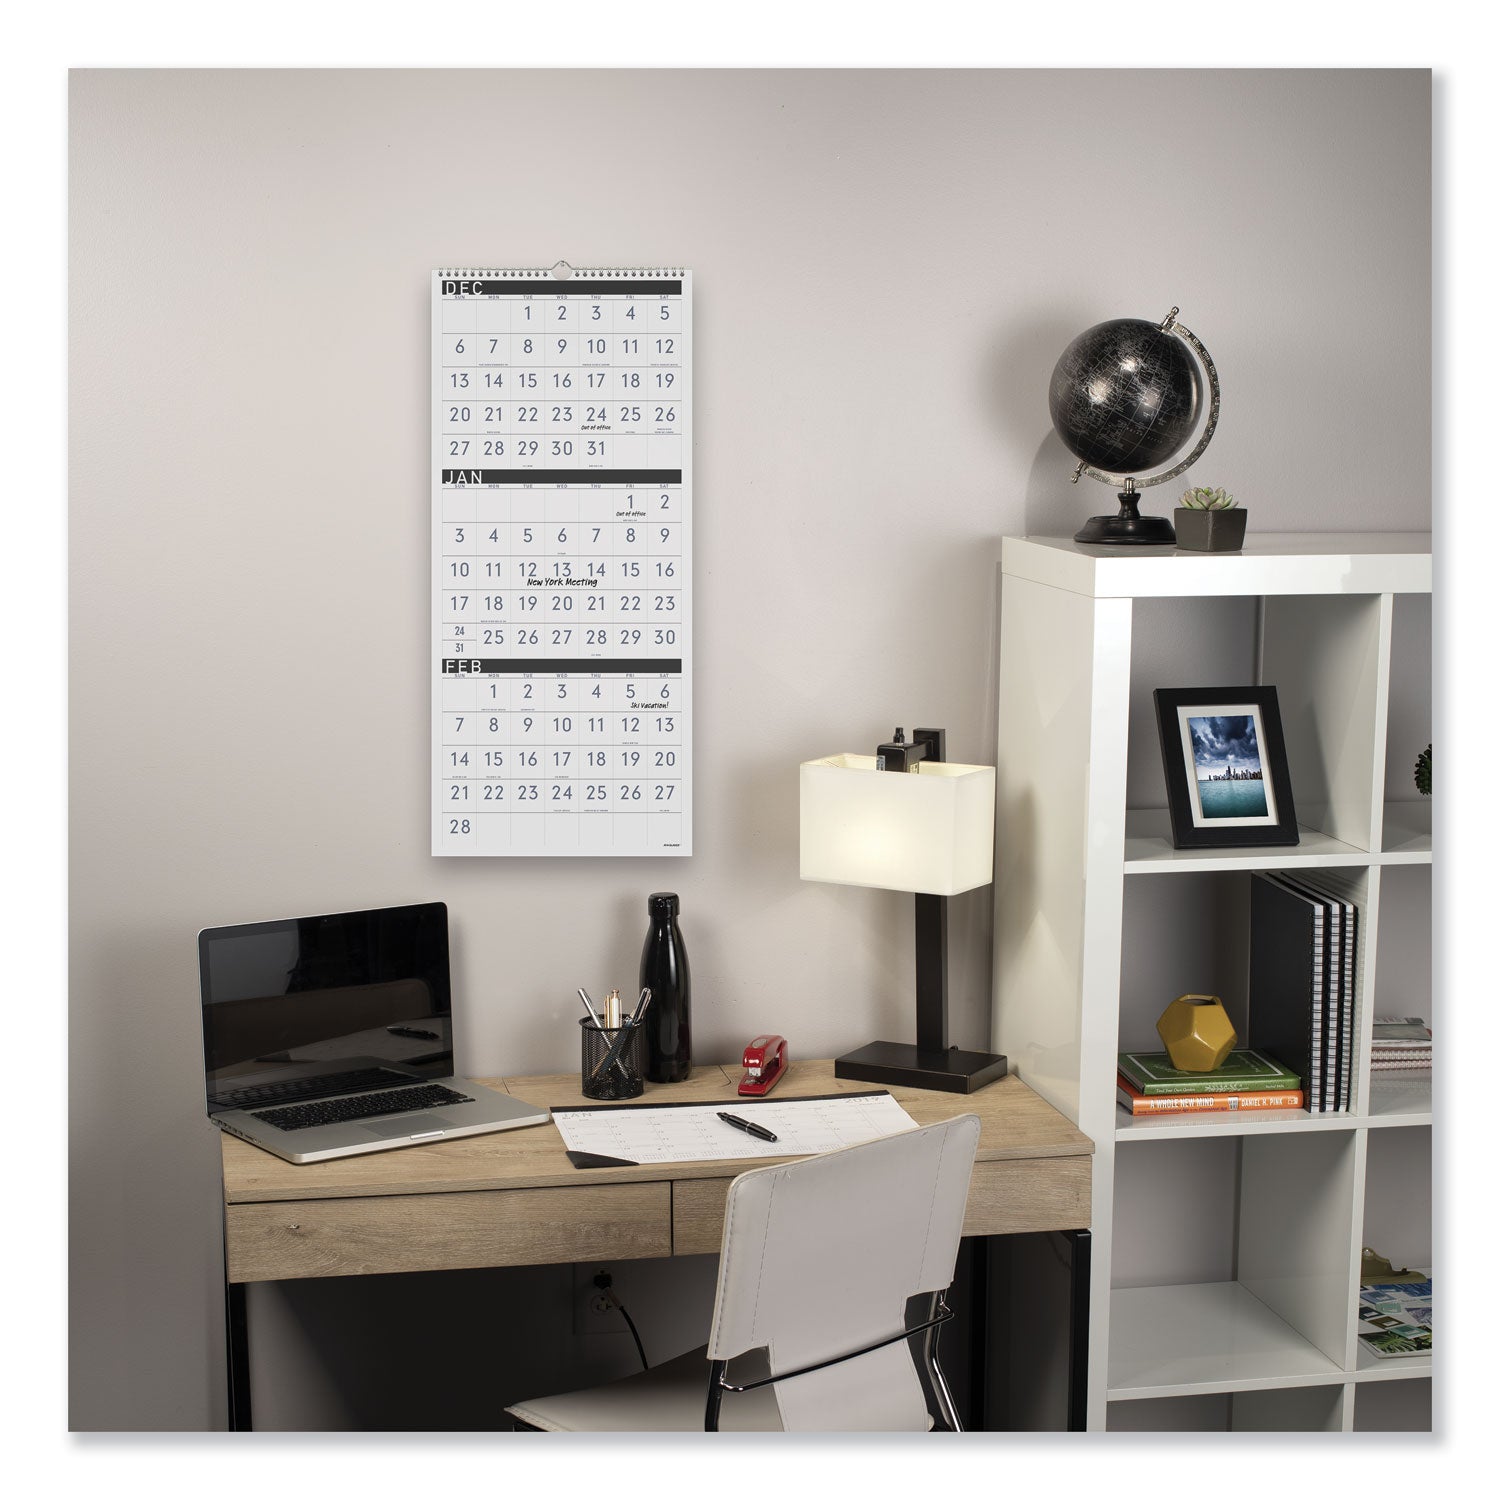 three-month-reference-wall-calendar-contemporary-artwork-formatting-12-x-27-white-sheets-15-month-dec-feb-2023-to-2025_aagpm11x28 - 2